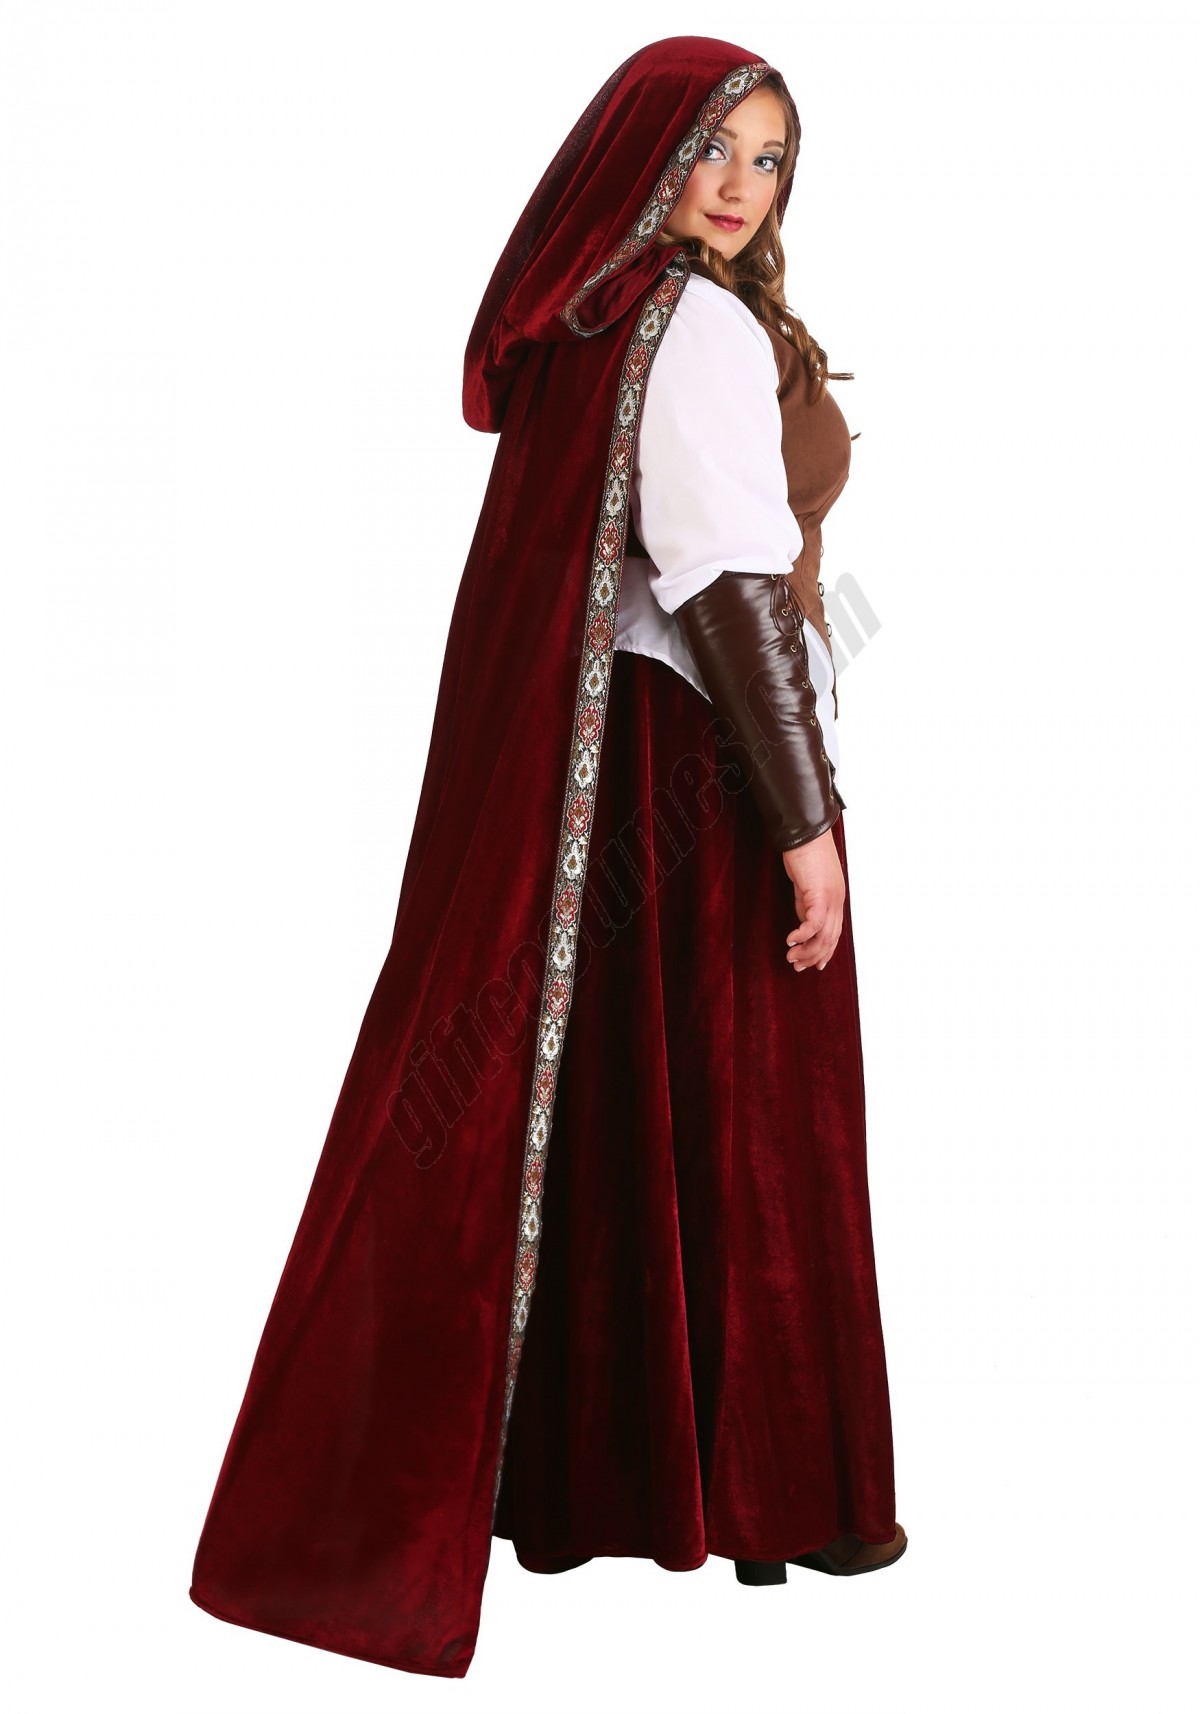 Deluxe Red Riding Hood Plus Size Costume Promotions - -3